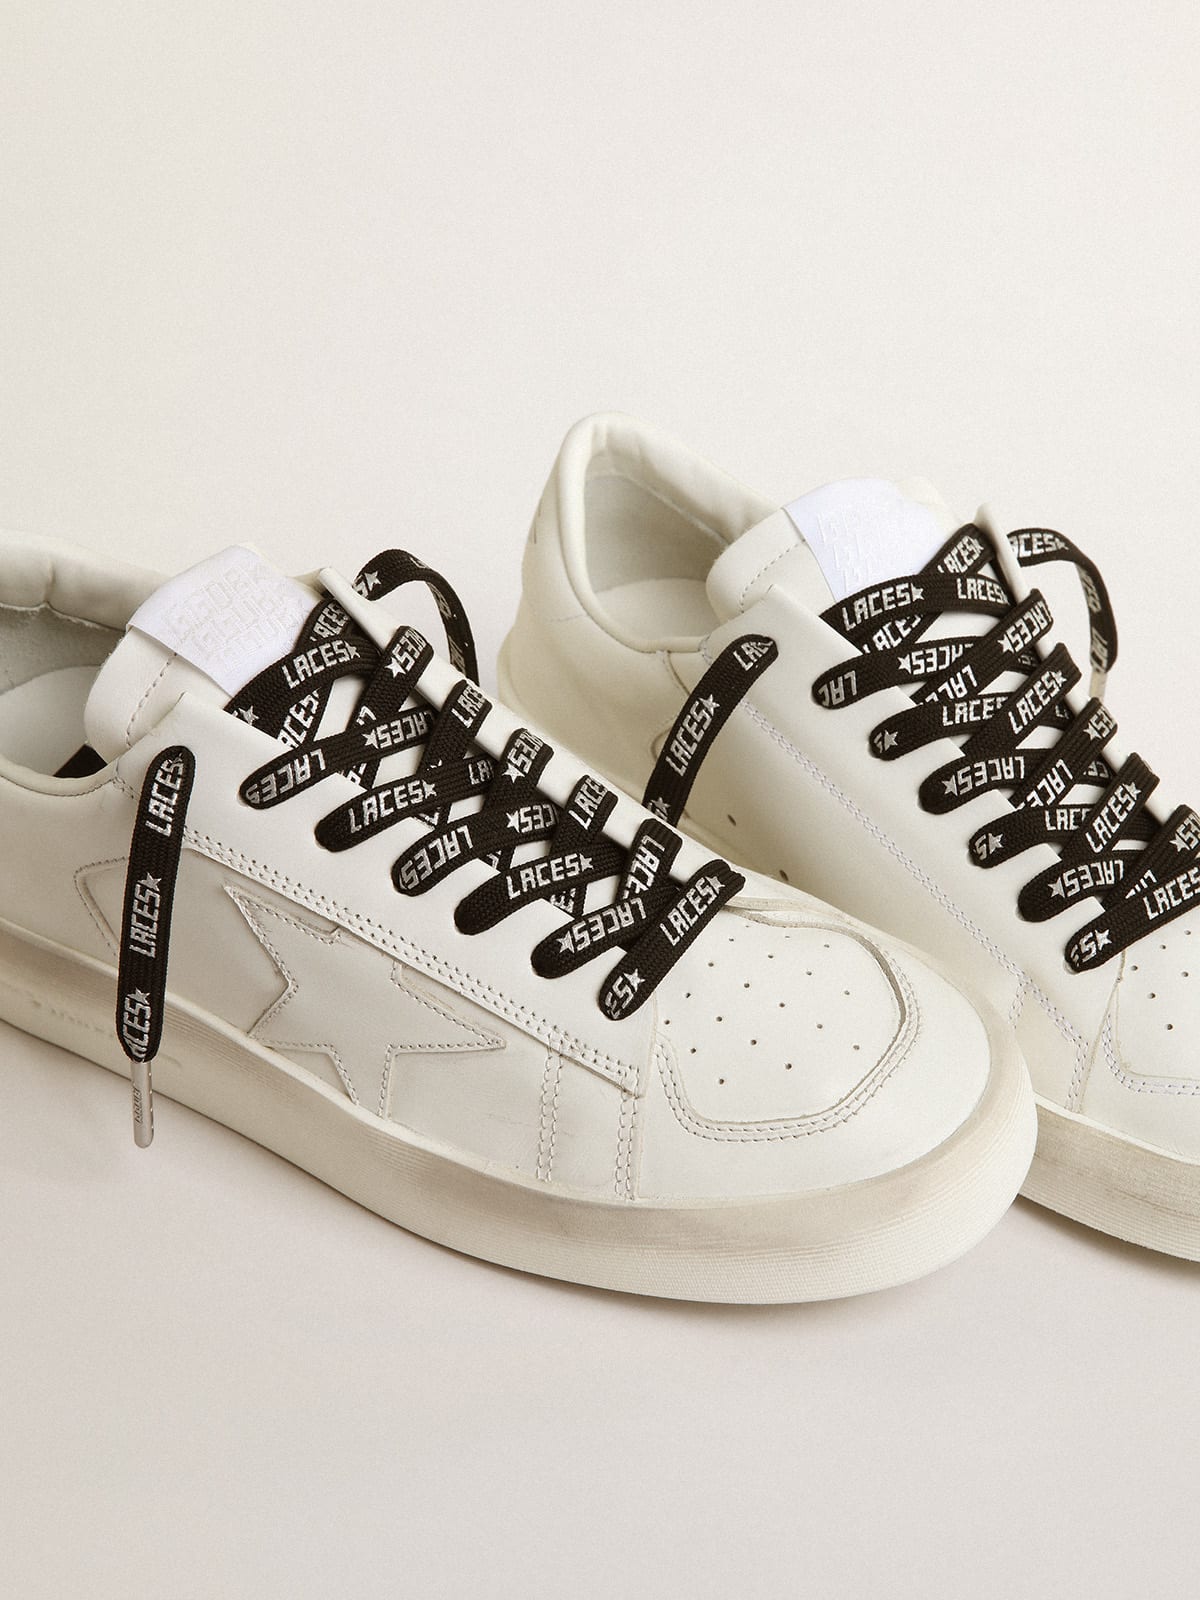 Golden Goose - Black laces with contrasting silver-colored ‘Laces’ lettering in 